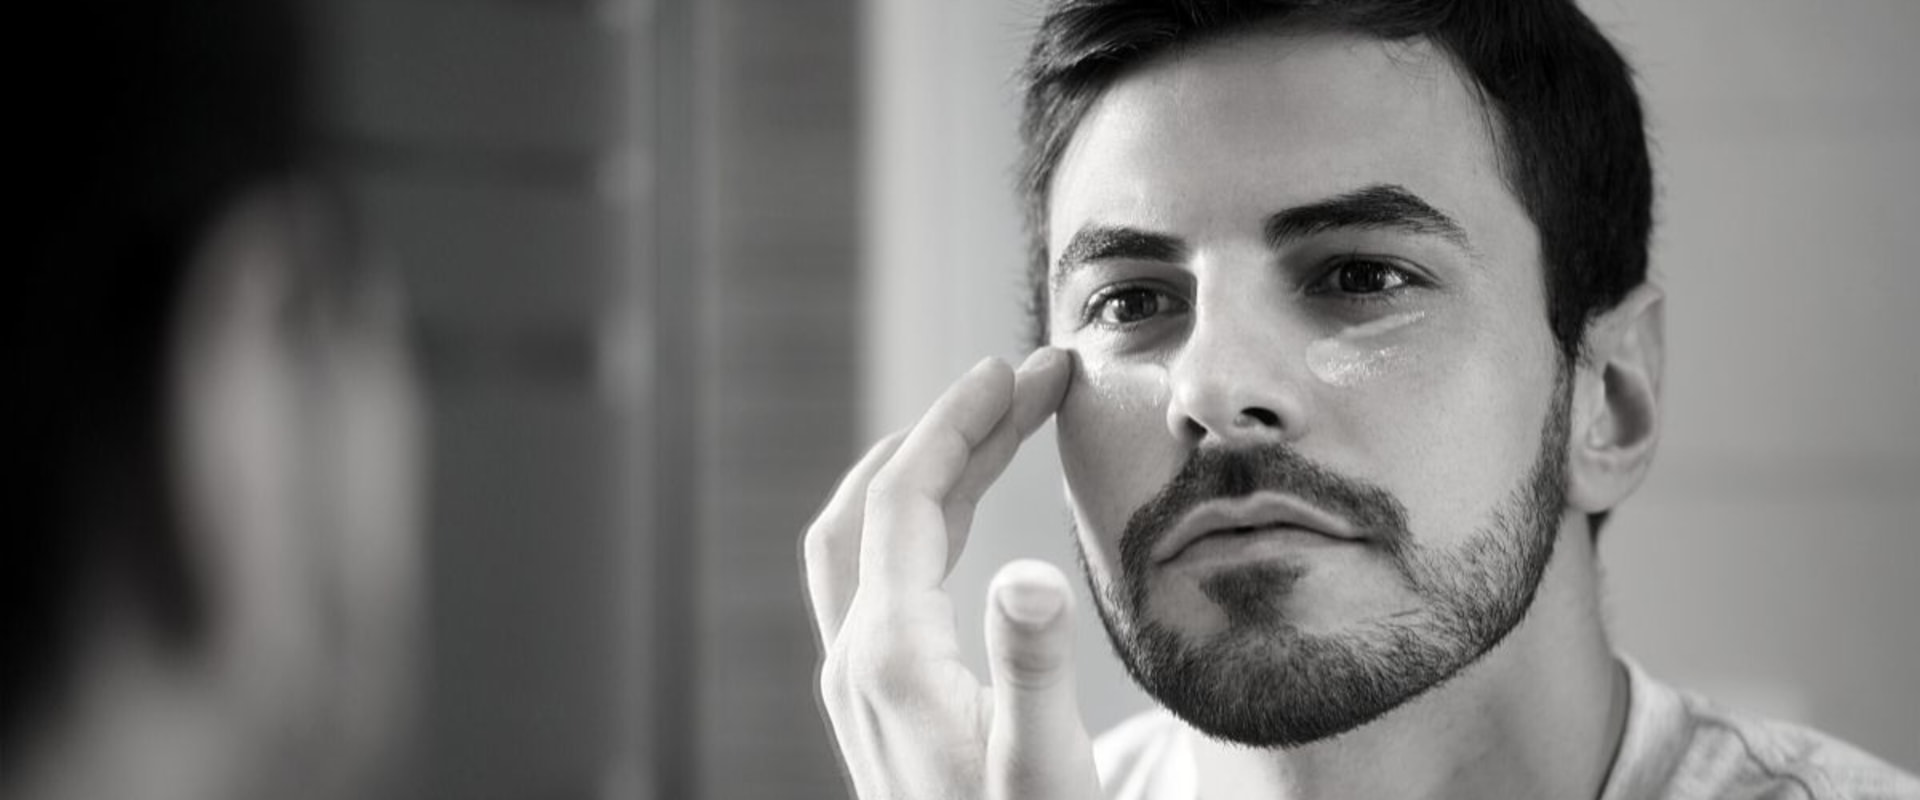 The Ultimate Guide to Reducing Dark Circles and Puffiness Under the Eyes for Men